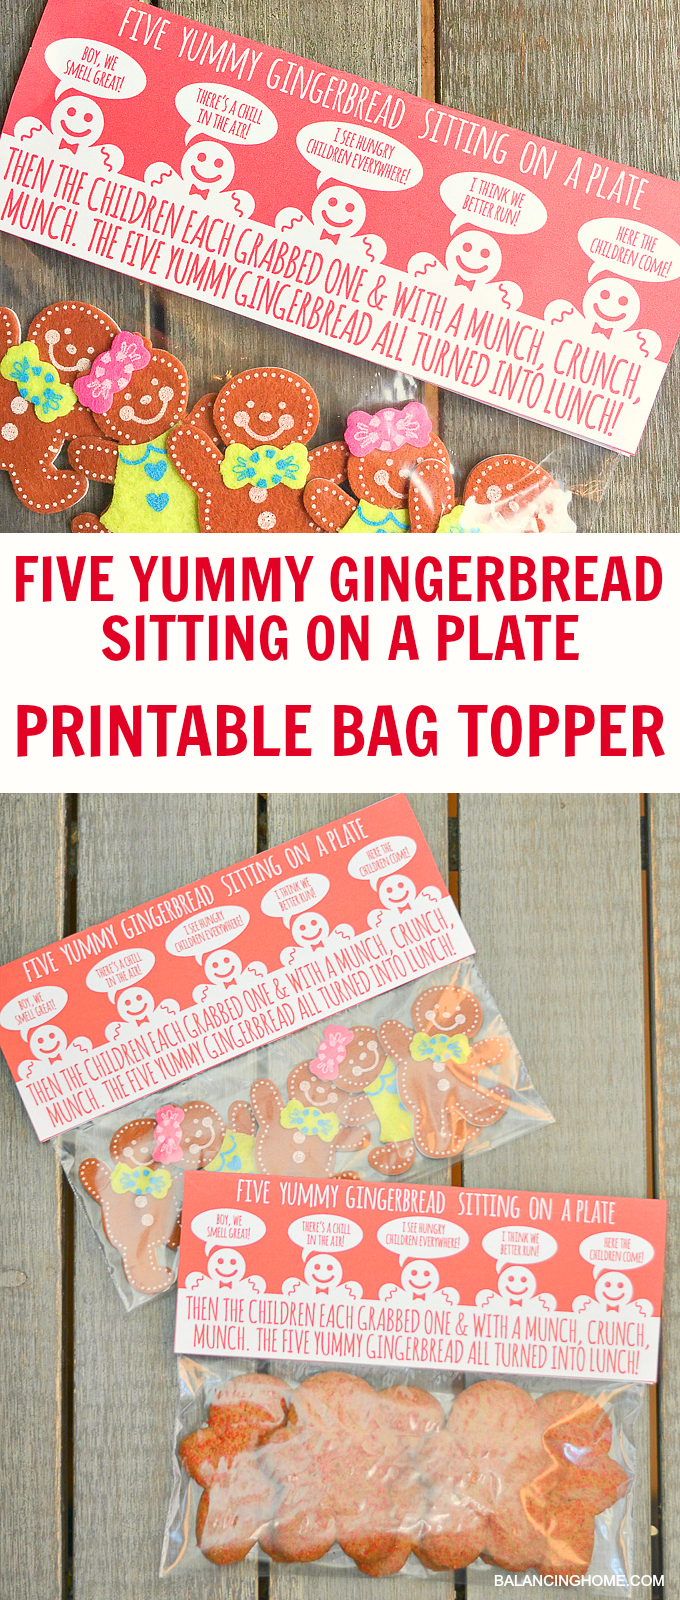 Five Yummy Gingerbread Bag Topper Printable